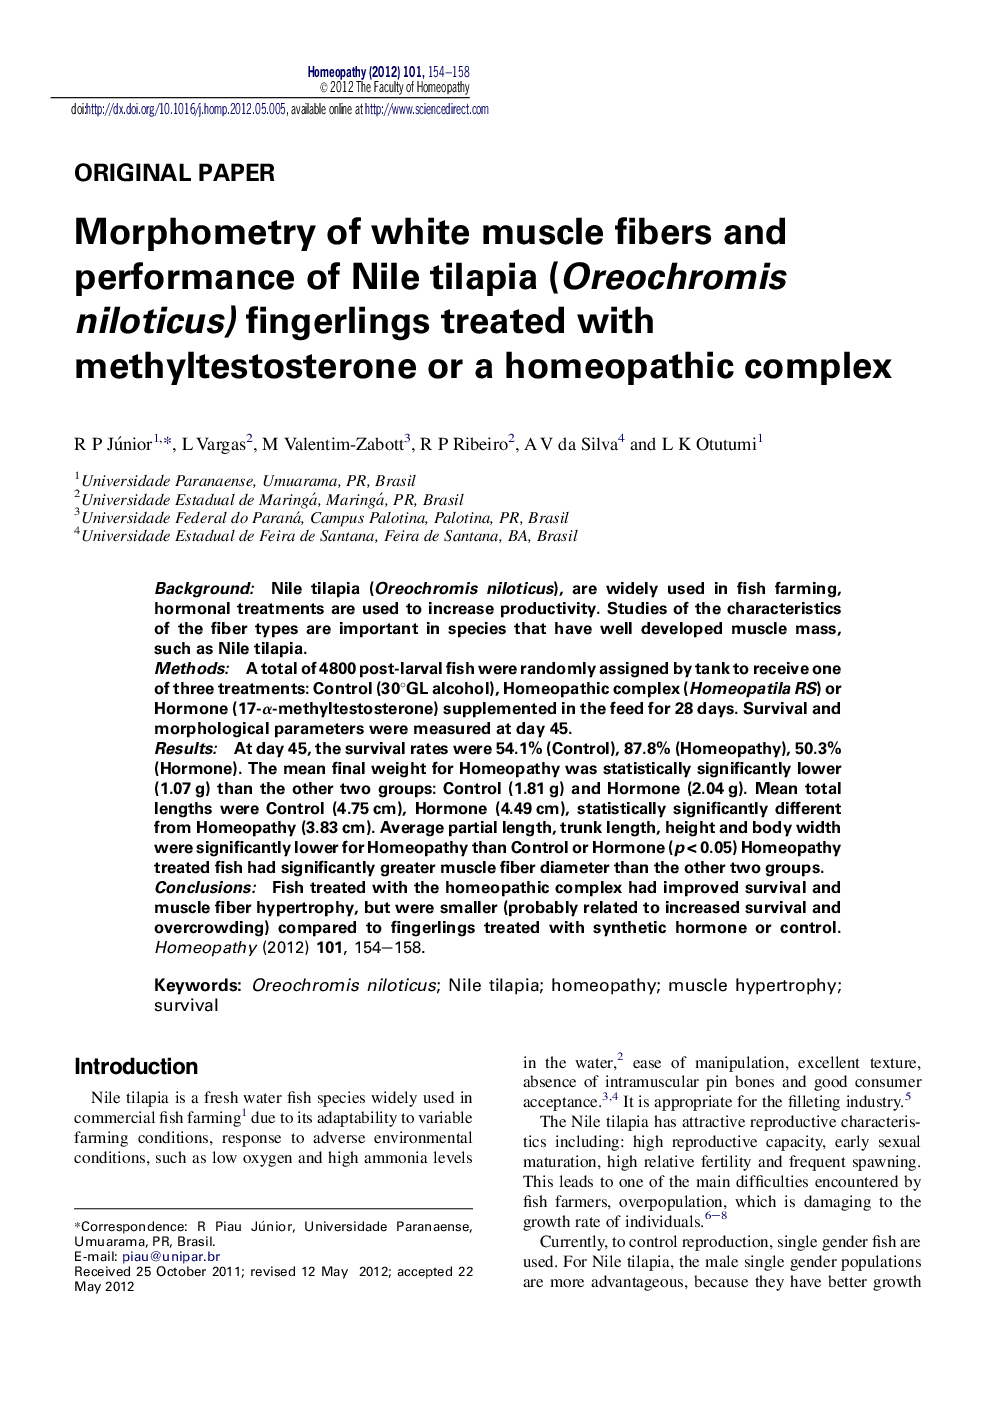 Morphometry of white muscle fibers and performance of Nile tilapia (Oreochromis niloticus) fingerlings treated with methyltestosterone or a homeopathic complex